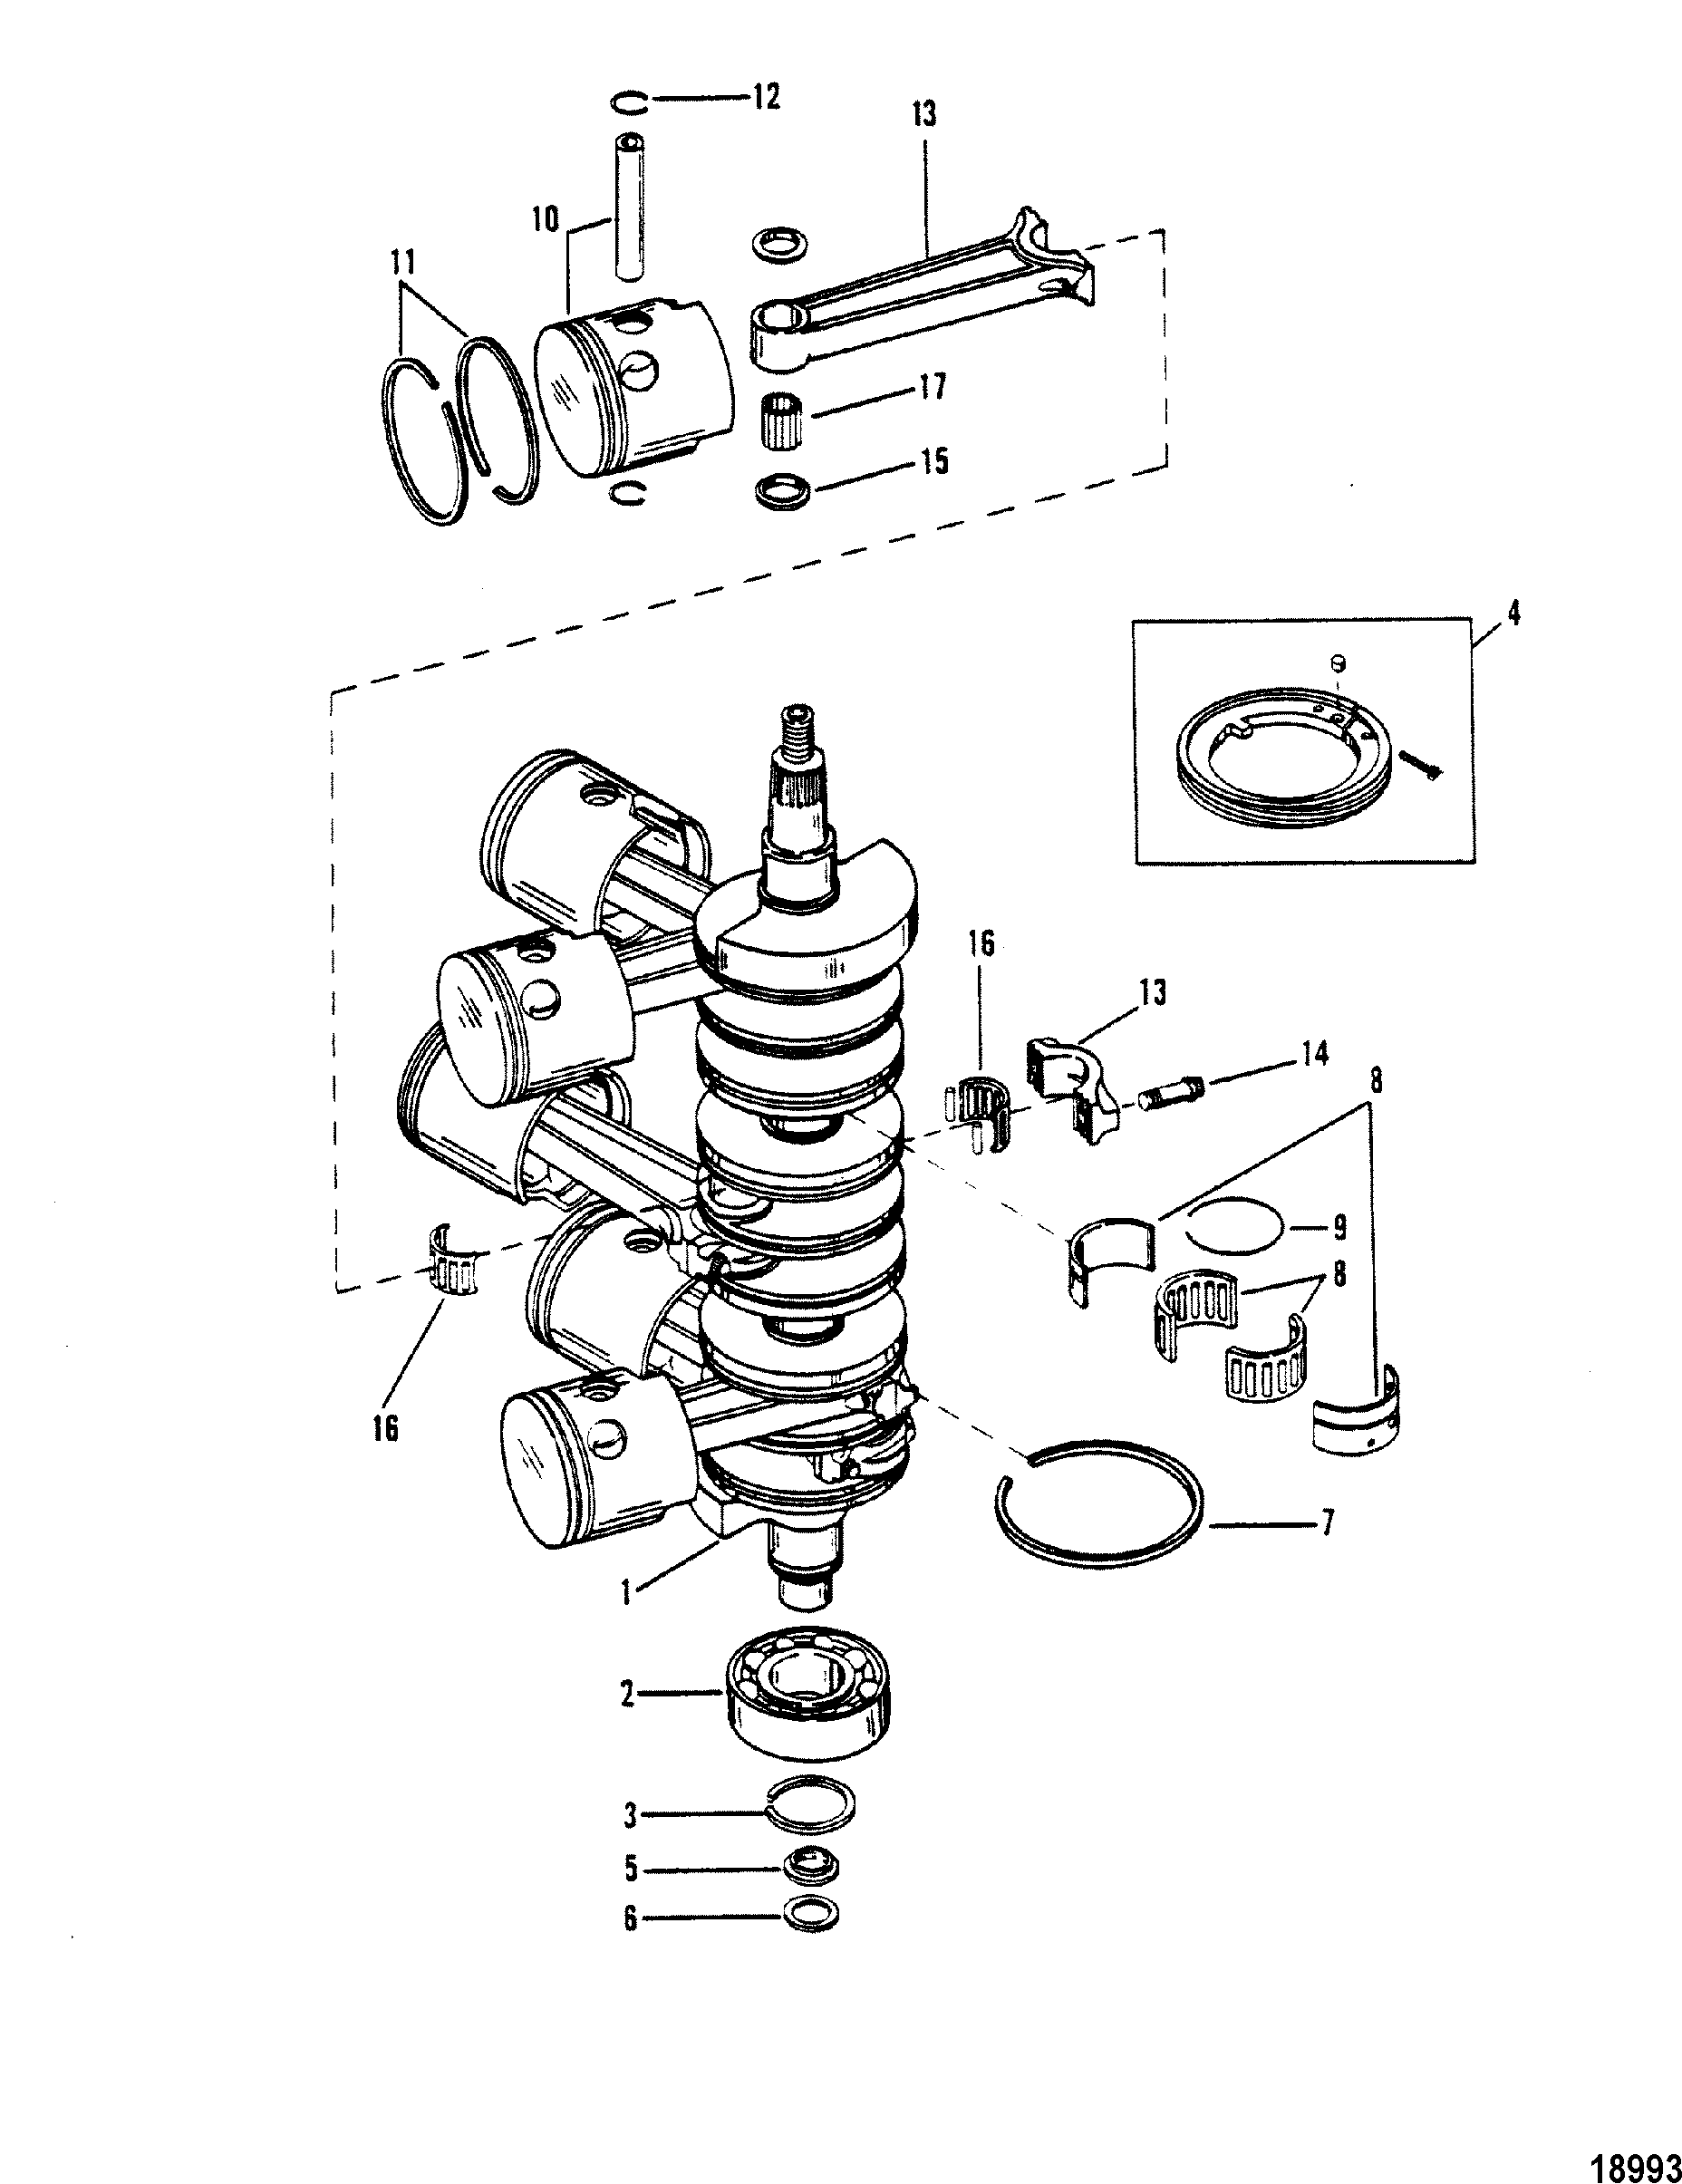 Crankshaft, Pistons, and Connecting Rods